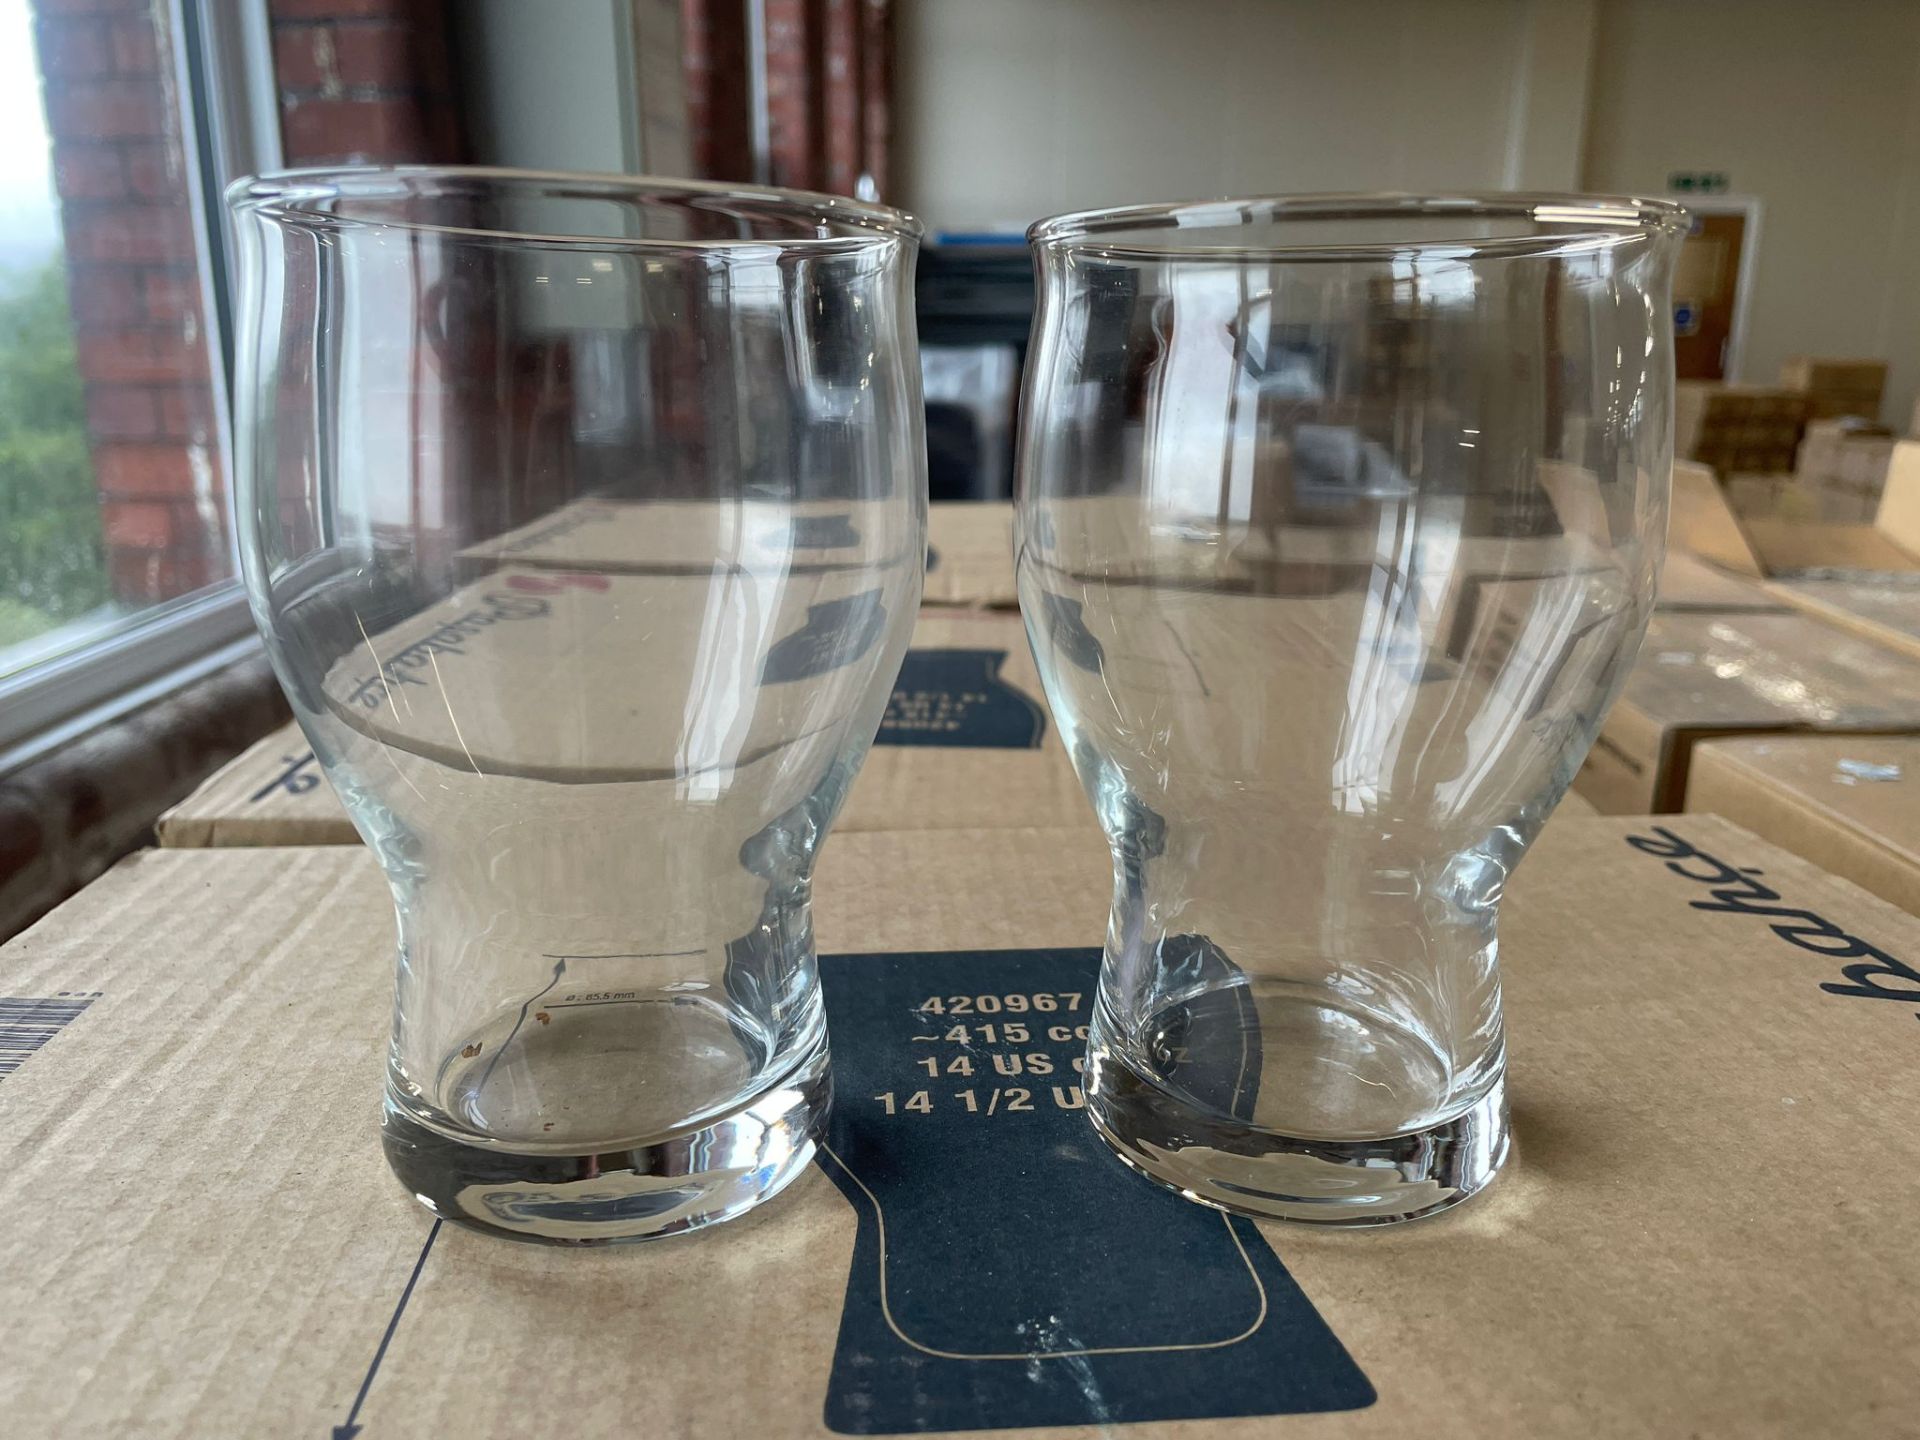 Job lot of Glasses, Whiskey tumblers, shot glasses & more - over 4000 - see description for contents - Image 6 of 13